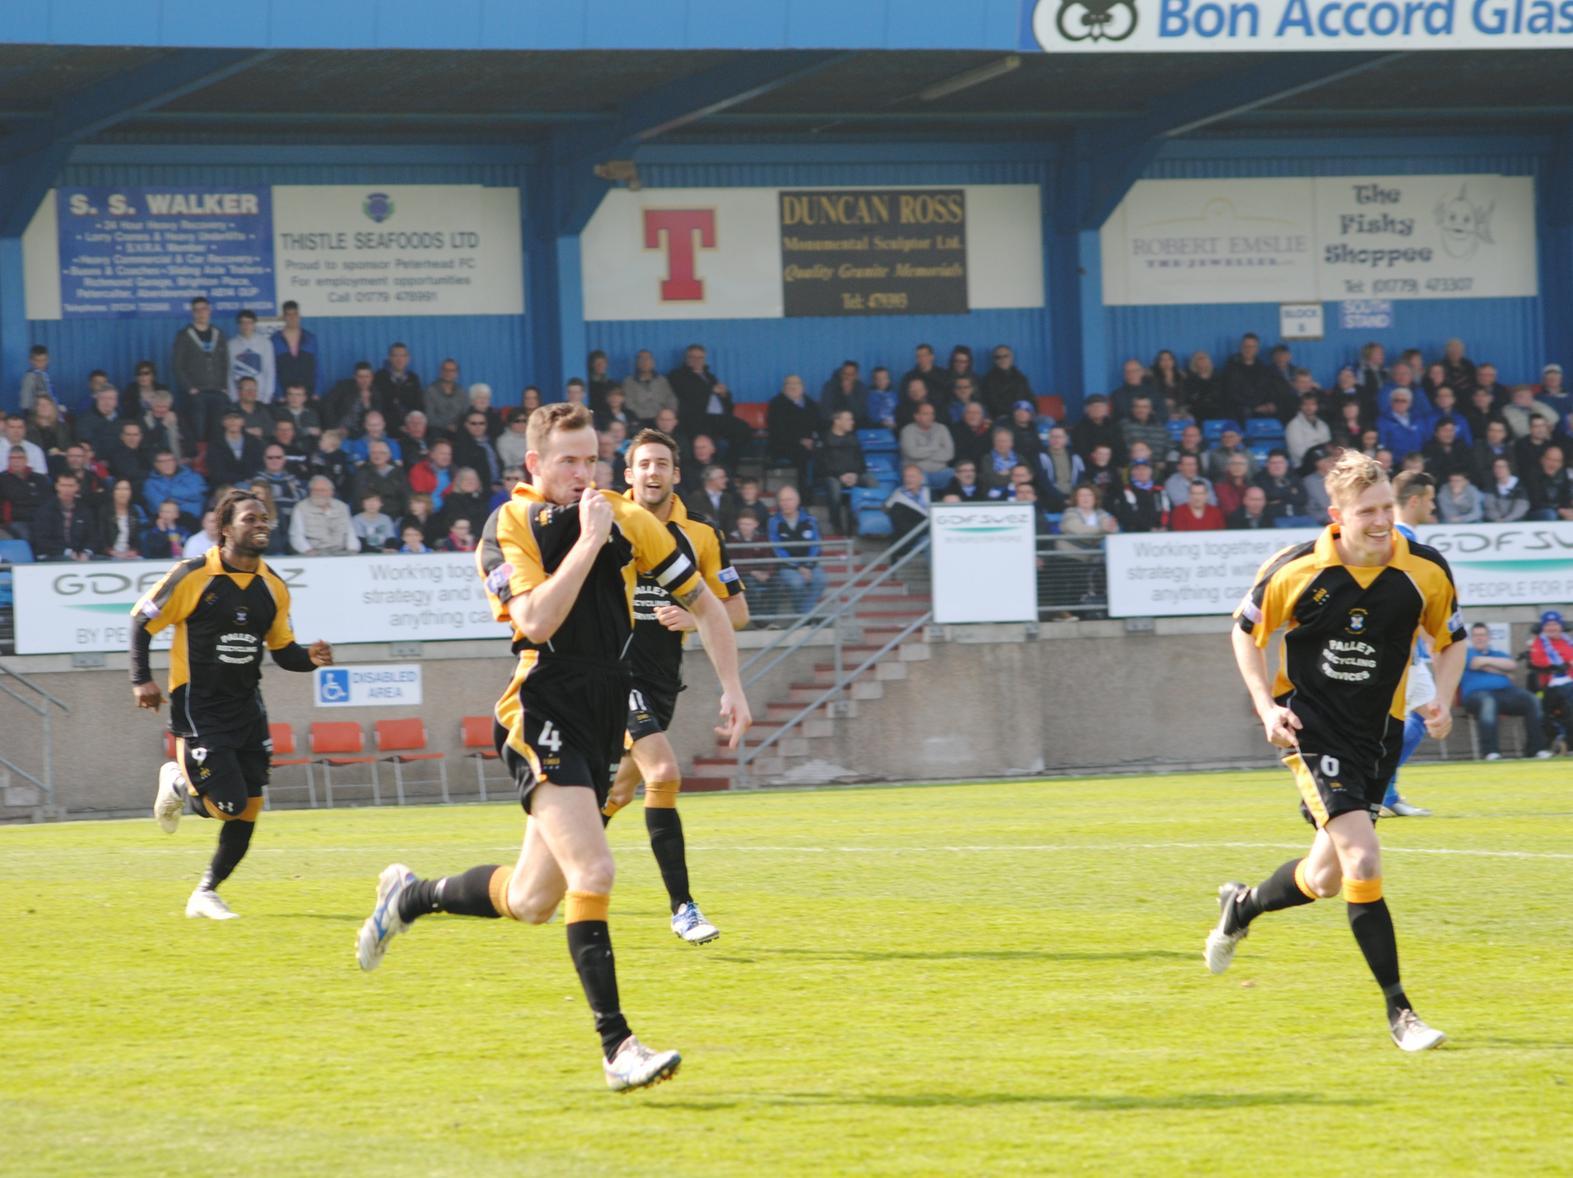 In 2013 David Muir's 48th minute goal secured a play-off win over Peterhead to secure Second Division football.